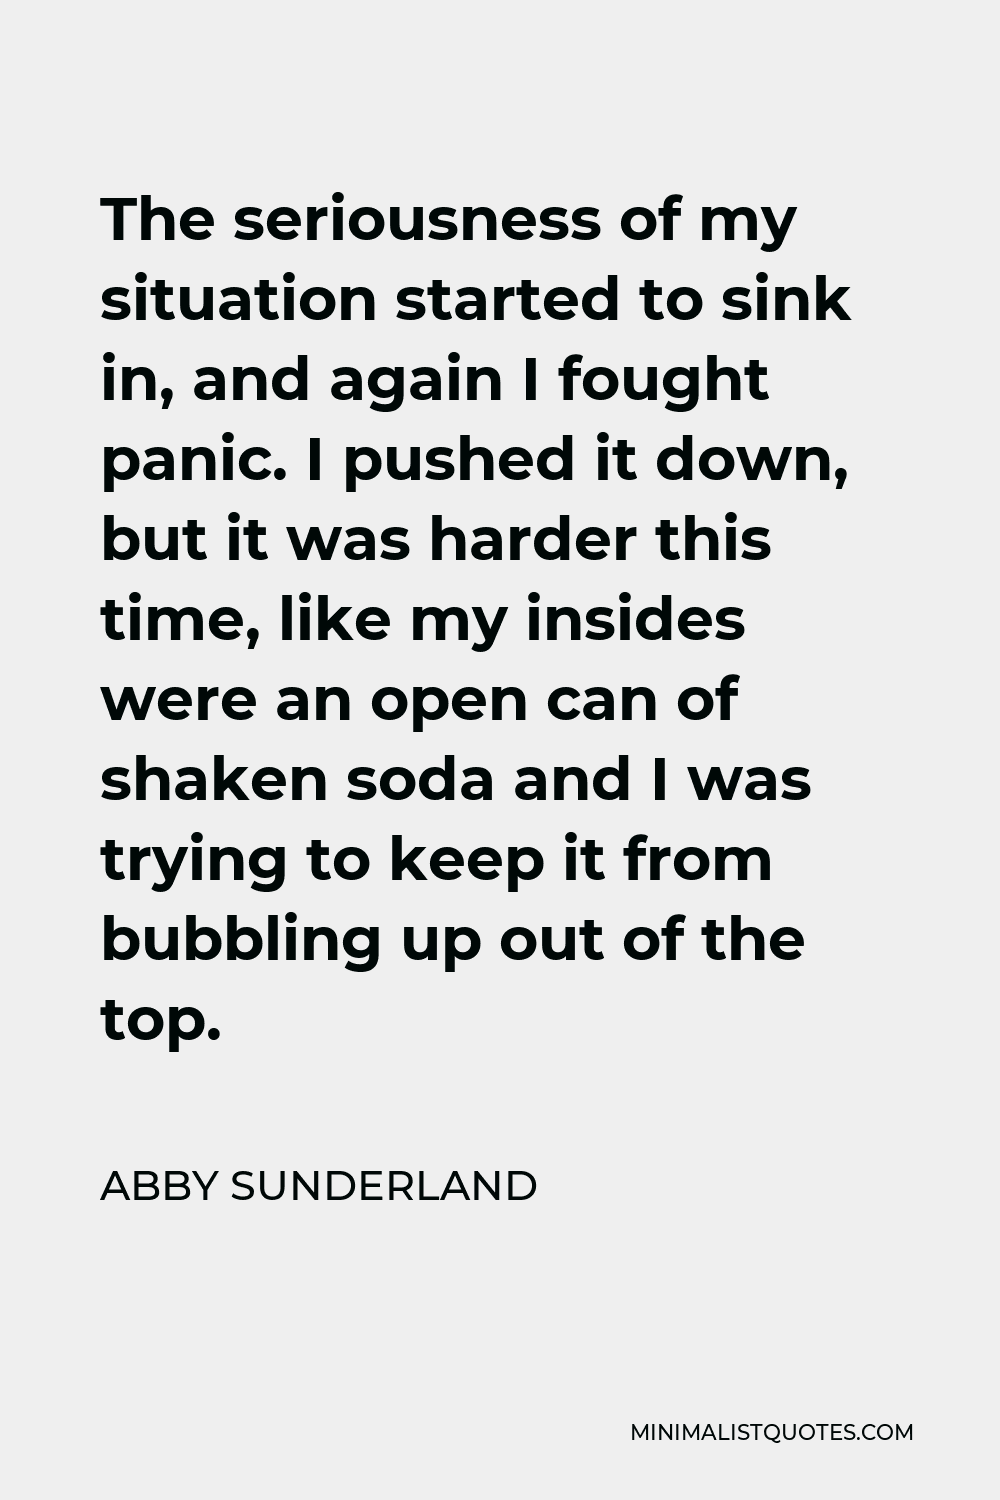 Abby Sunderland Quote - The seriousness of my situation started to sink in, and again I fought panic. I pushed it down, but it was harder this time, like my insides were an open can of shaken soda and I was trying to keep it from bubbling up out of the top.